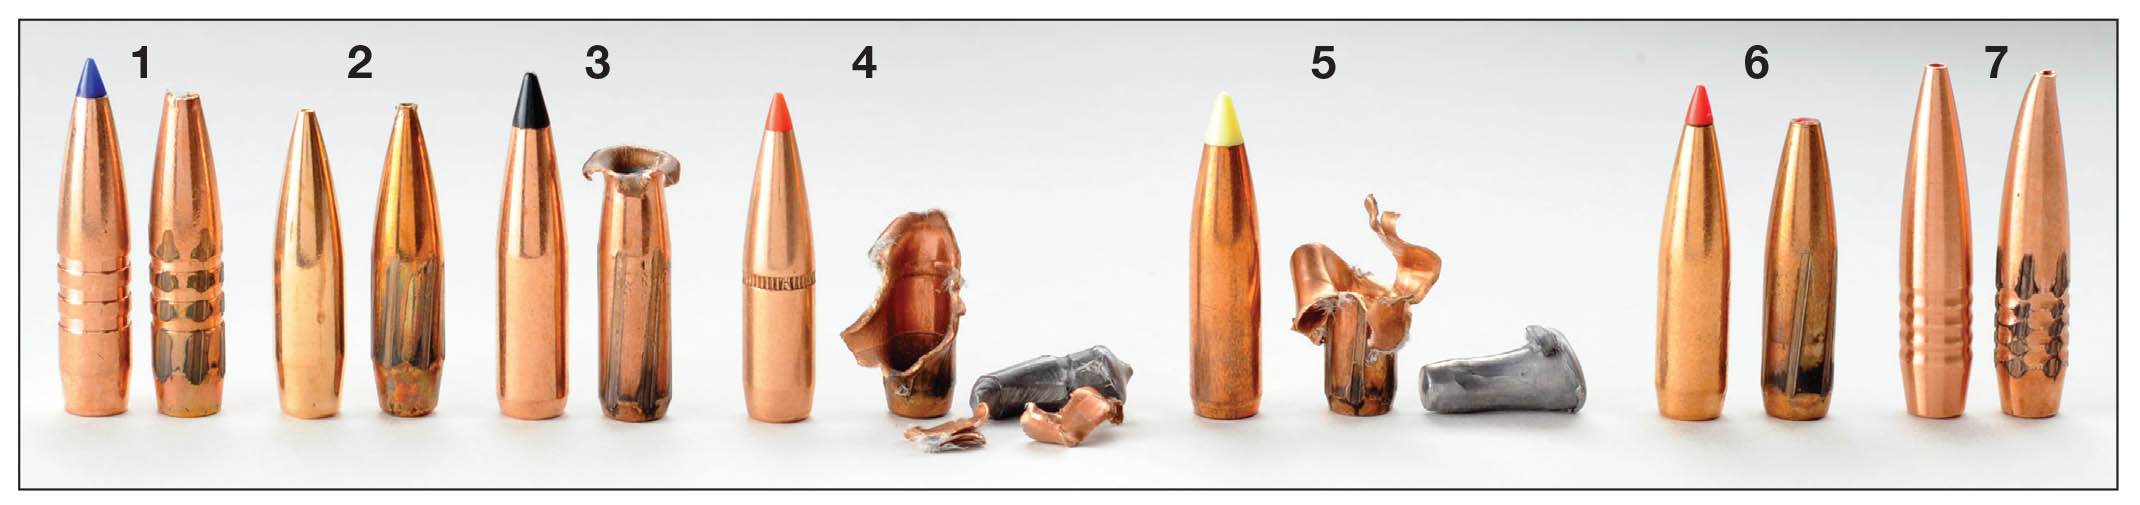 These .277-inch diameter 130-grain bullets were recovered from wet newspapers (left to right): (1) Barnes 129-grain LRX BT with a velocity of 1,565 fps just prior to impact, 16-inch penetration; (2) Berger 130 VLD Hunting, 1,542 fps, 17 inches; (3) Swift 130 Scirocco II, 1,548 fps, 15 inches; (4) Hornady 130 SST, 1,513, 9 inches; (5) Nosler 130 Ballistic Tip, 1,538, 11 inches; (6) Hornady 130 InterBond, 1,513, 15 inches; (7) Hammer 126, 1,573, 15 inches.